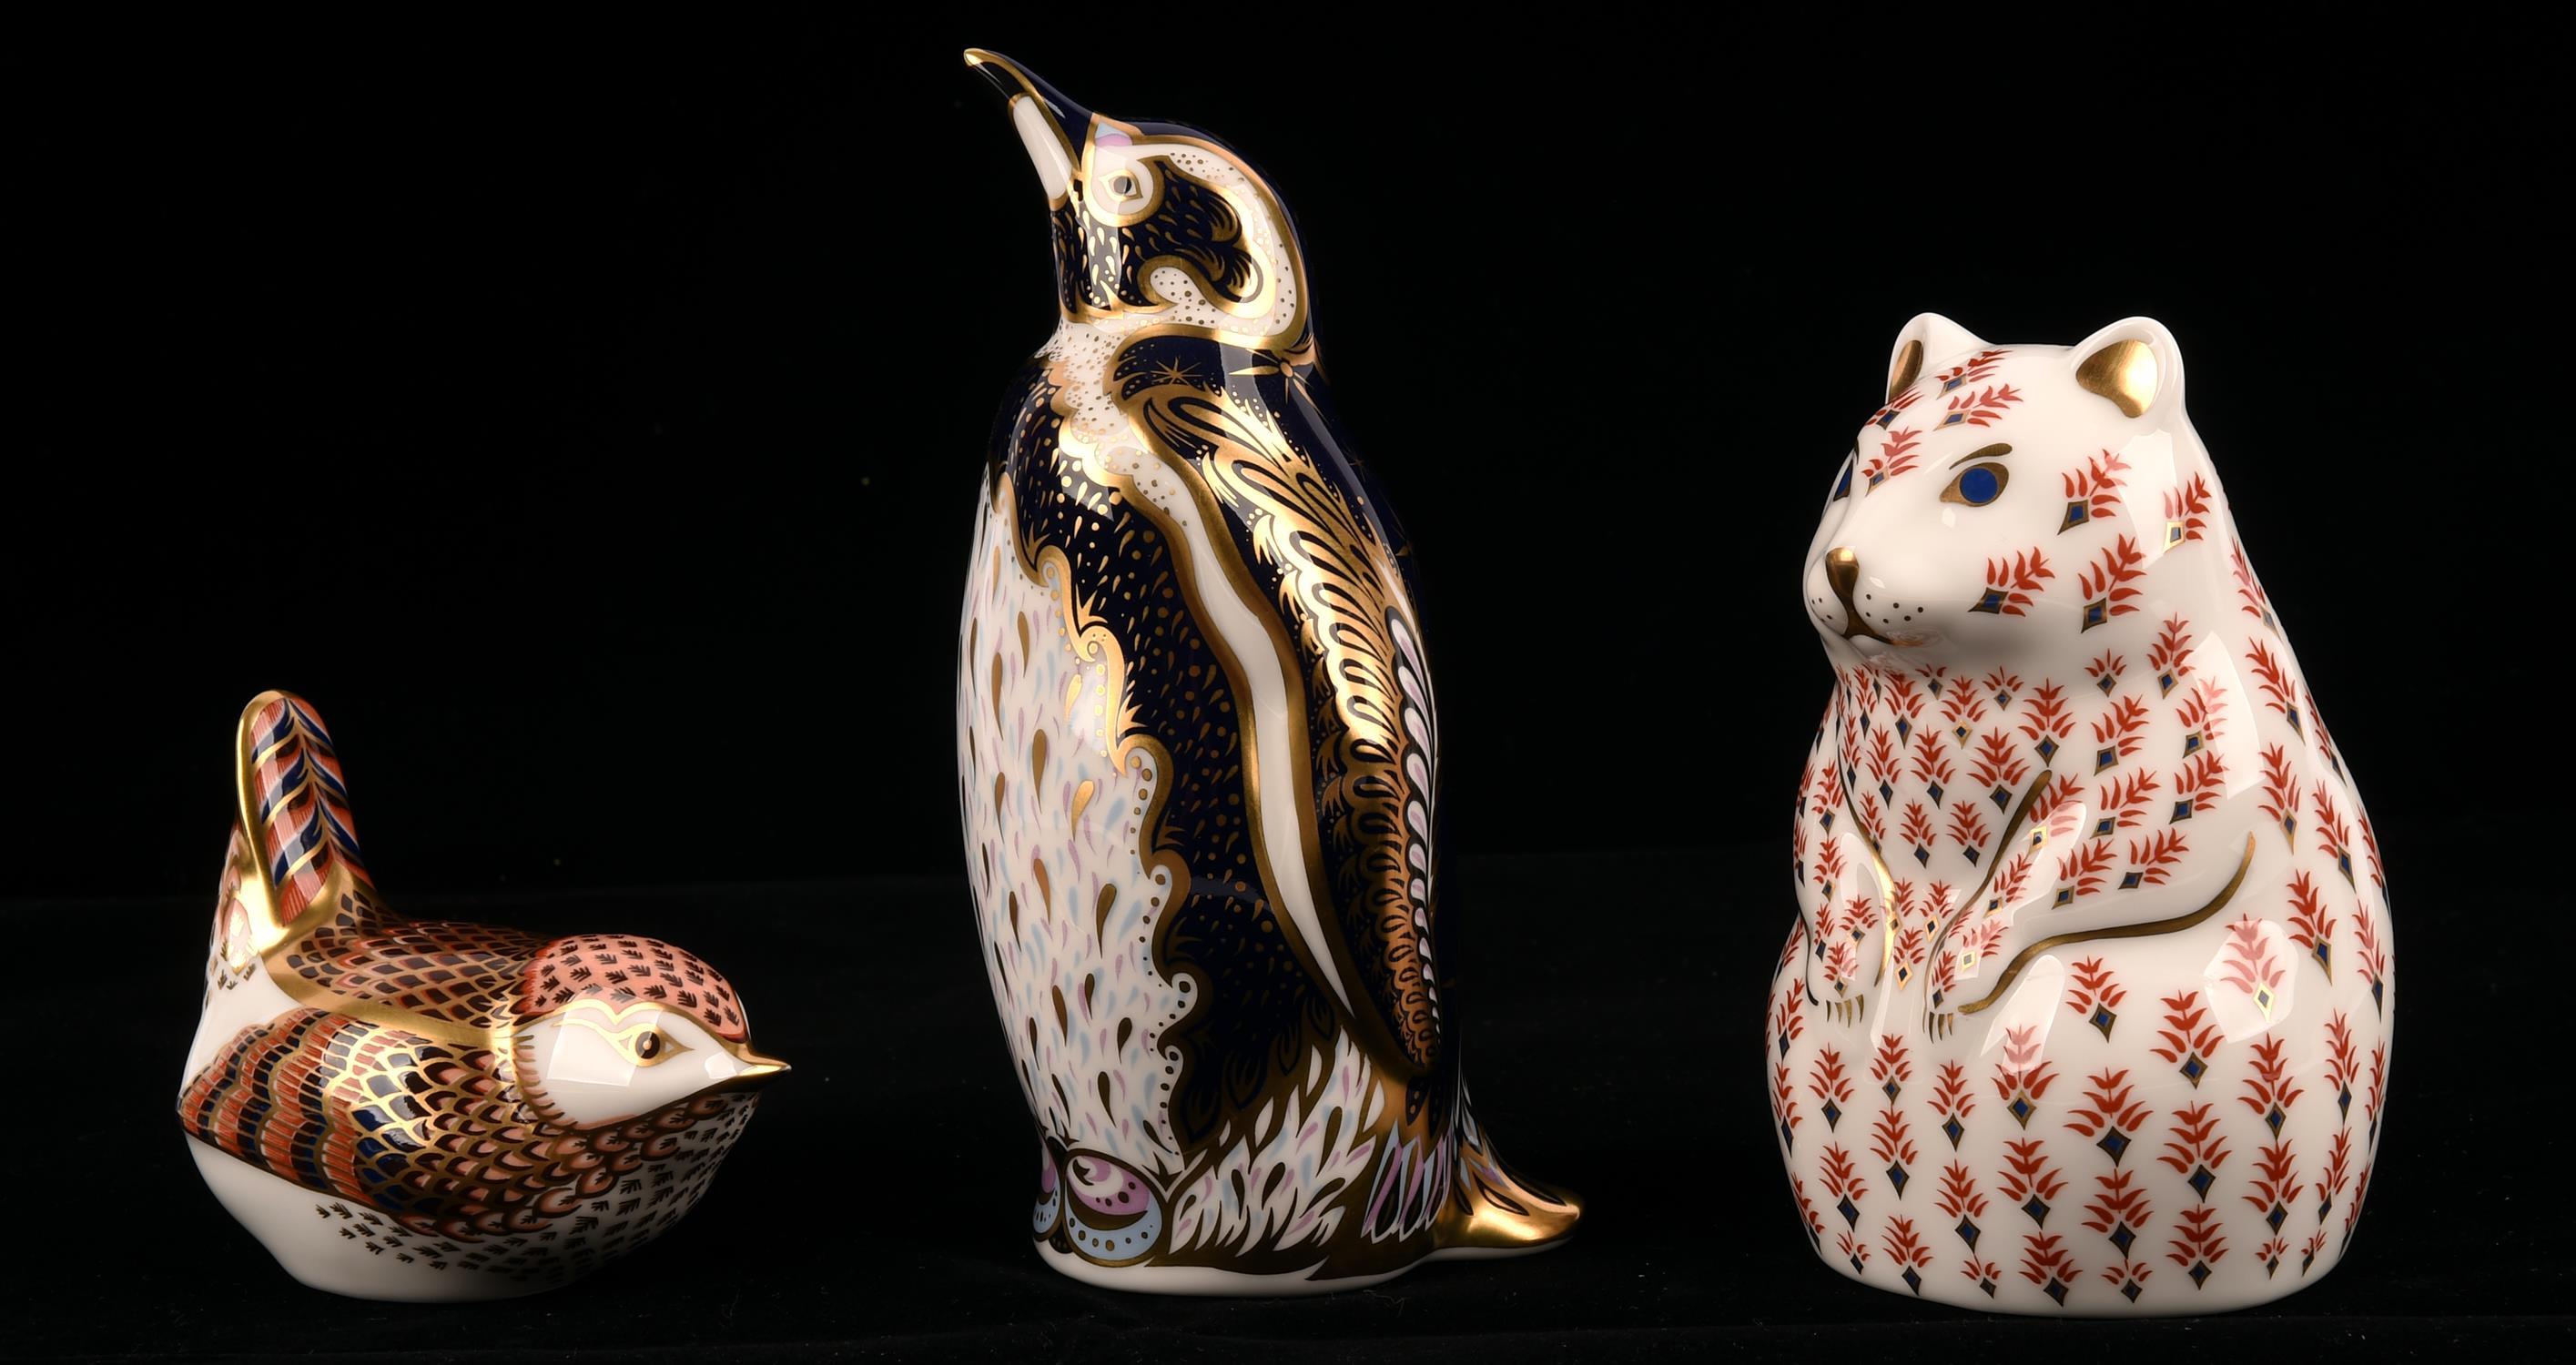 Royal Crown derby, Galapagos Penguin with gold stopper from the Sinclair's Endangered Species